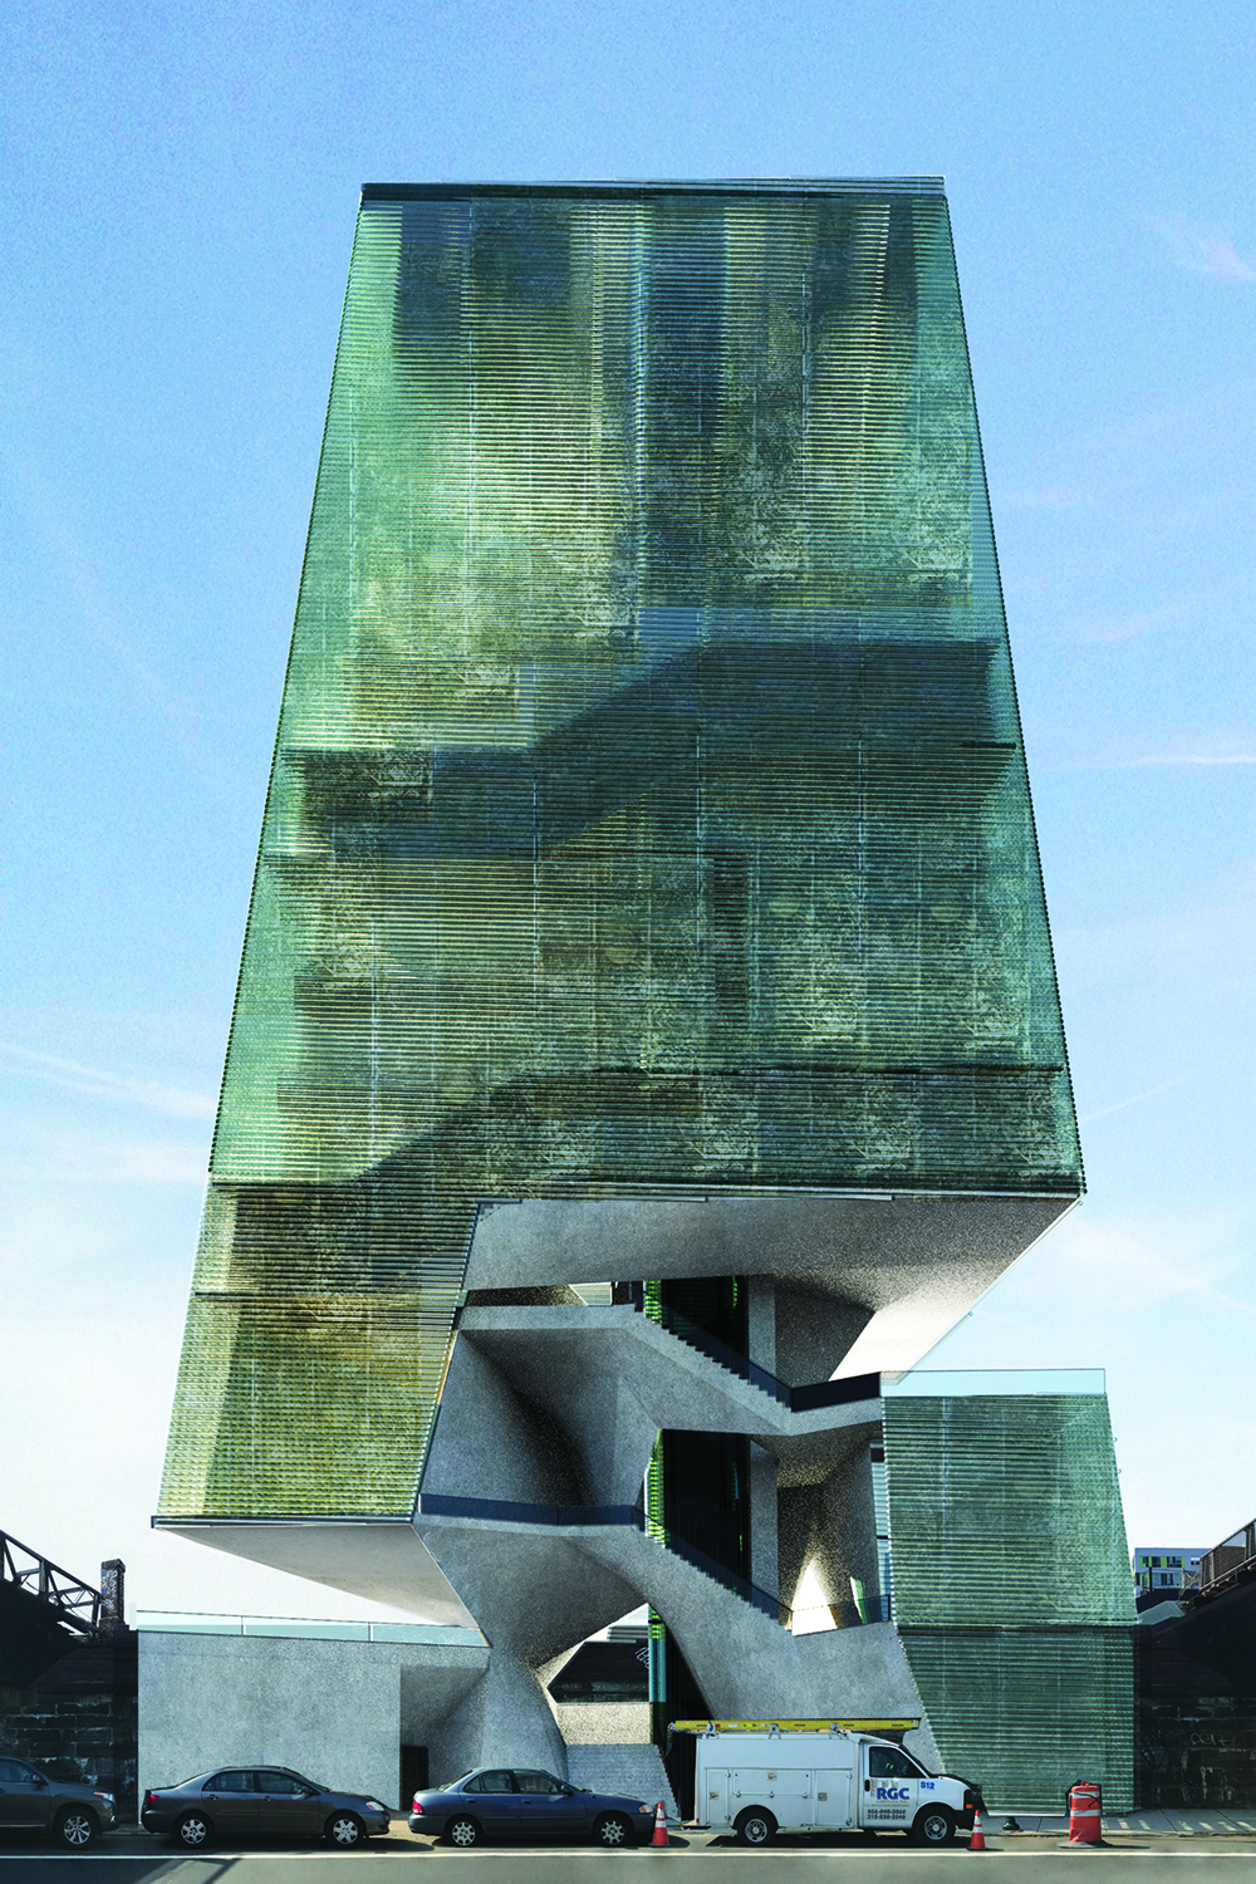 Architectural rendering of a building with green surface